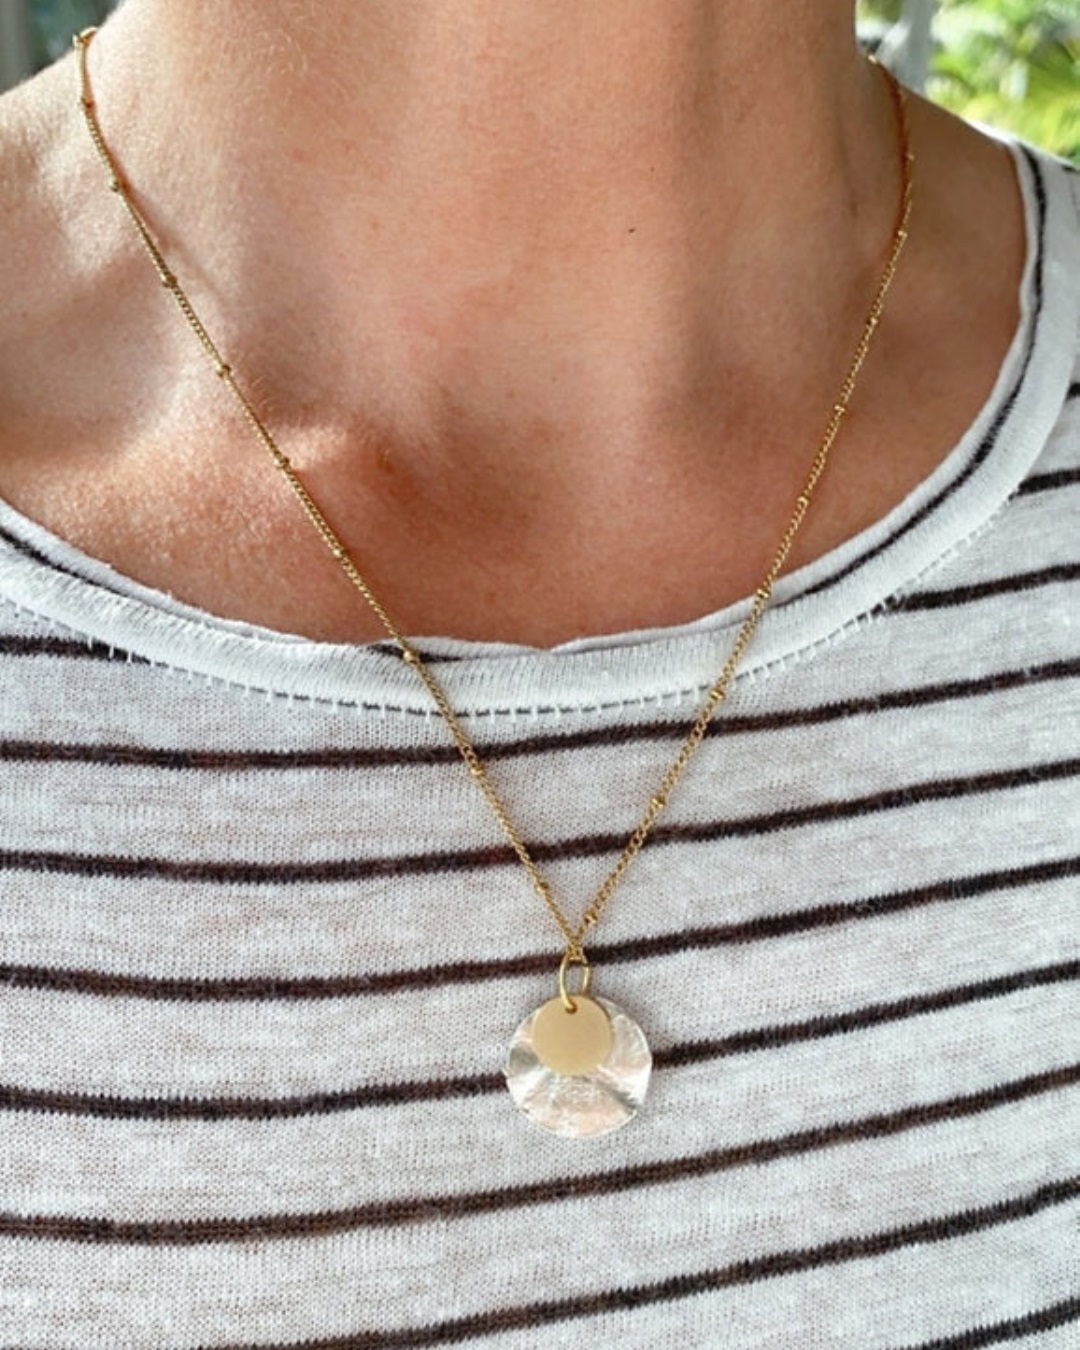 Gold and silver disk necklace around neck